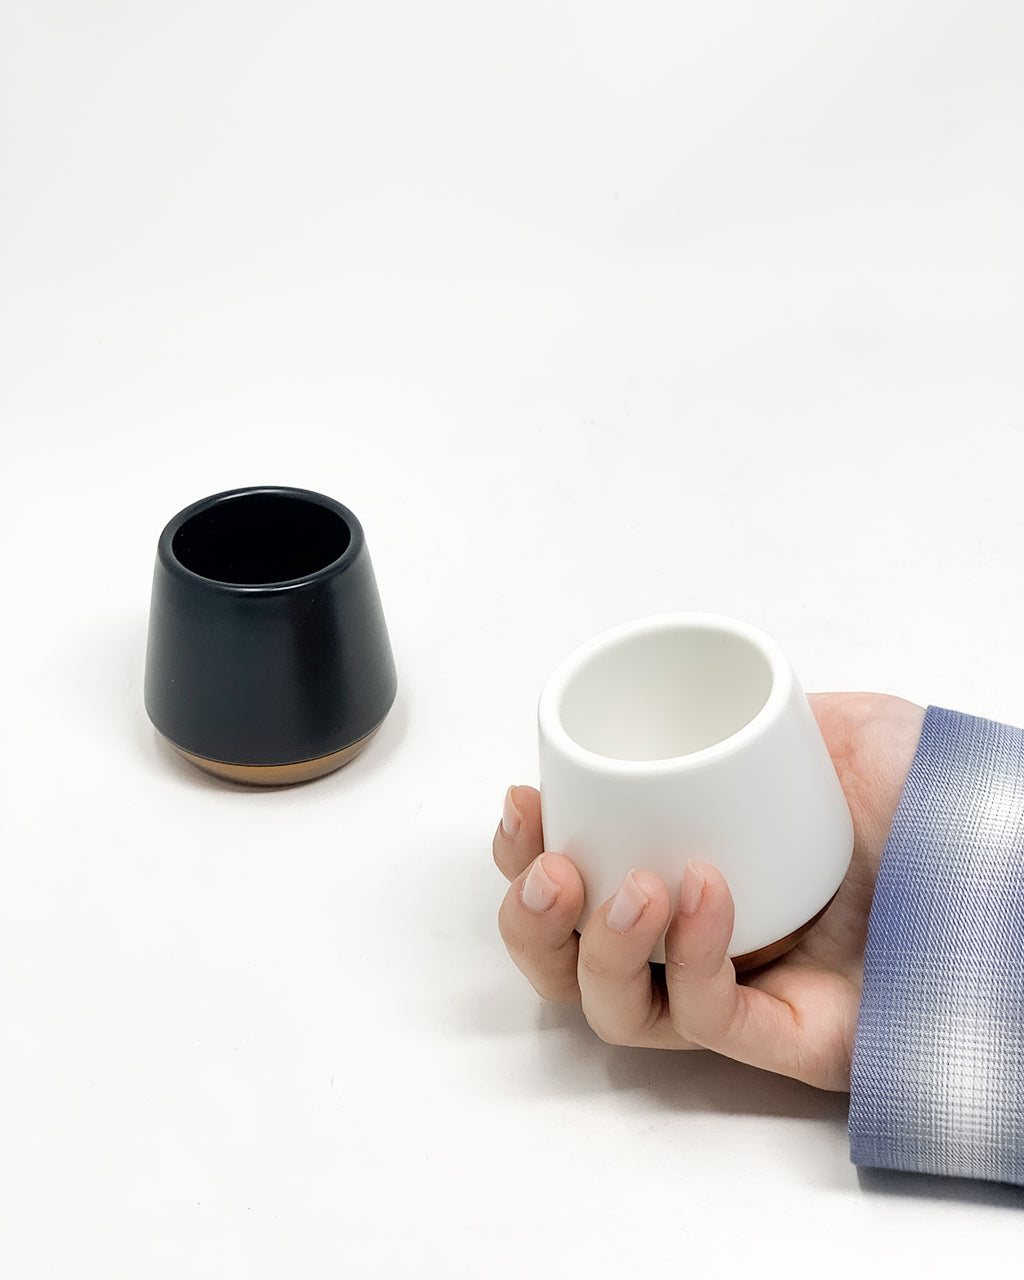 Fellow Joey Double Wall Espresso Mugs: A Must-Have for Coffee